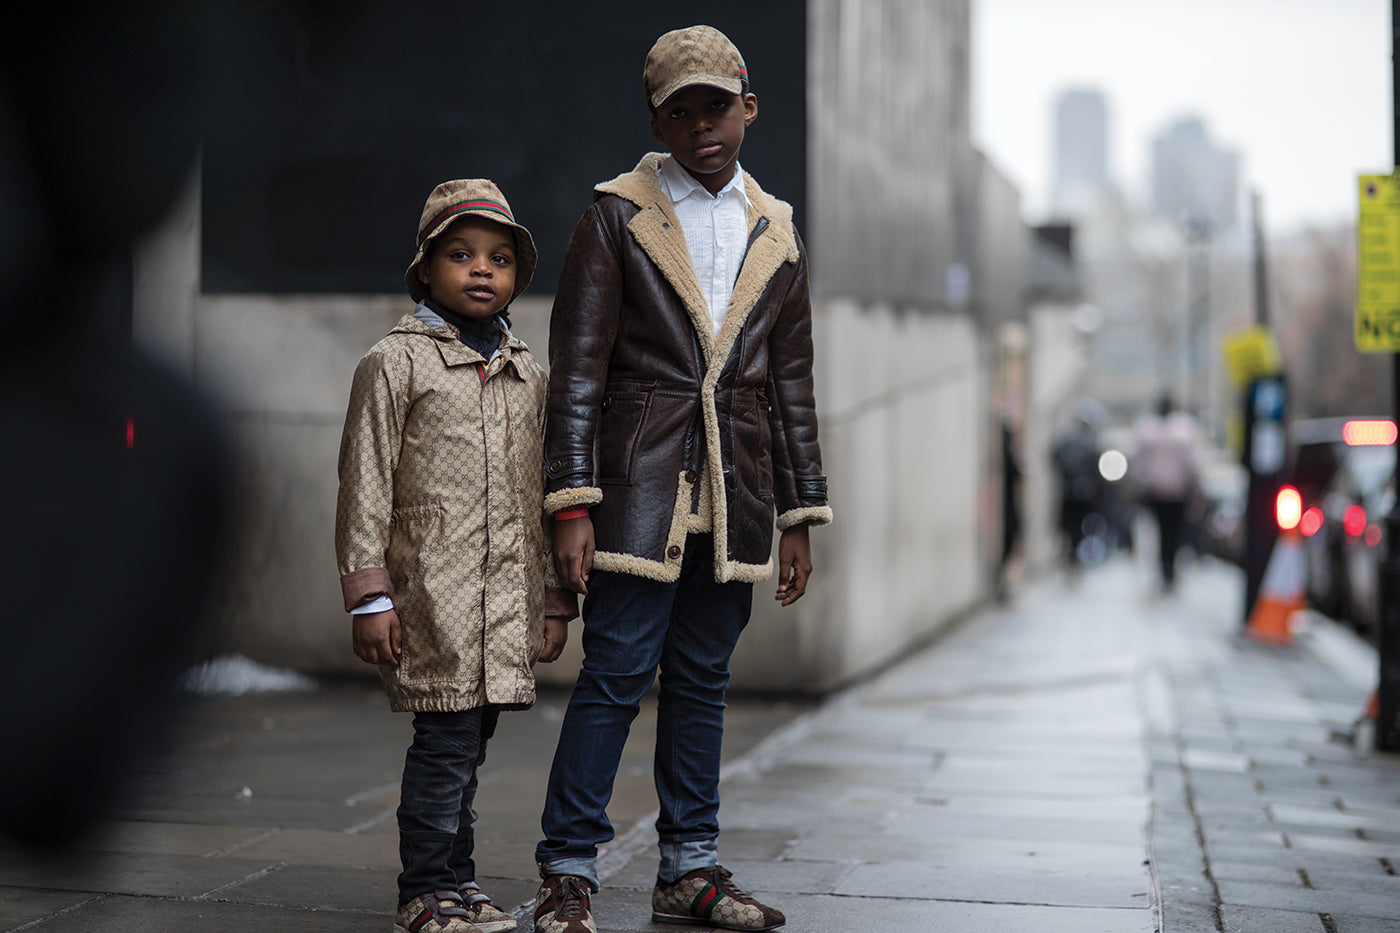 Two children standing on a sidewalk dressed in Gucci jackets in the streets of London. (Photo: Eva Losada)